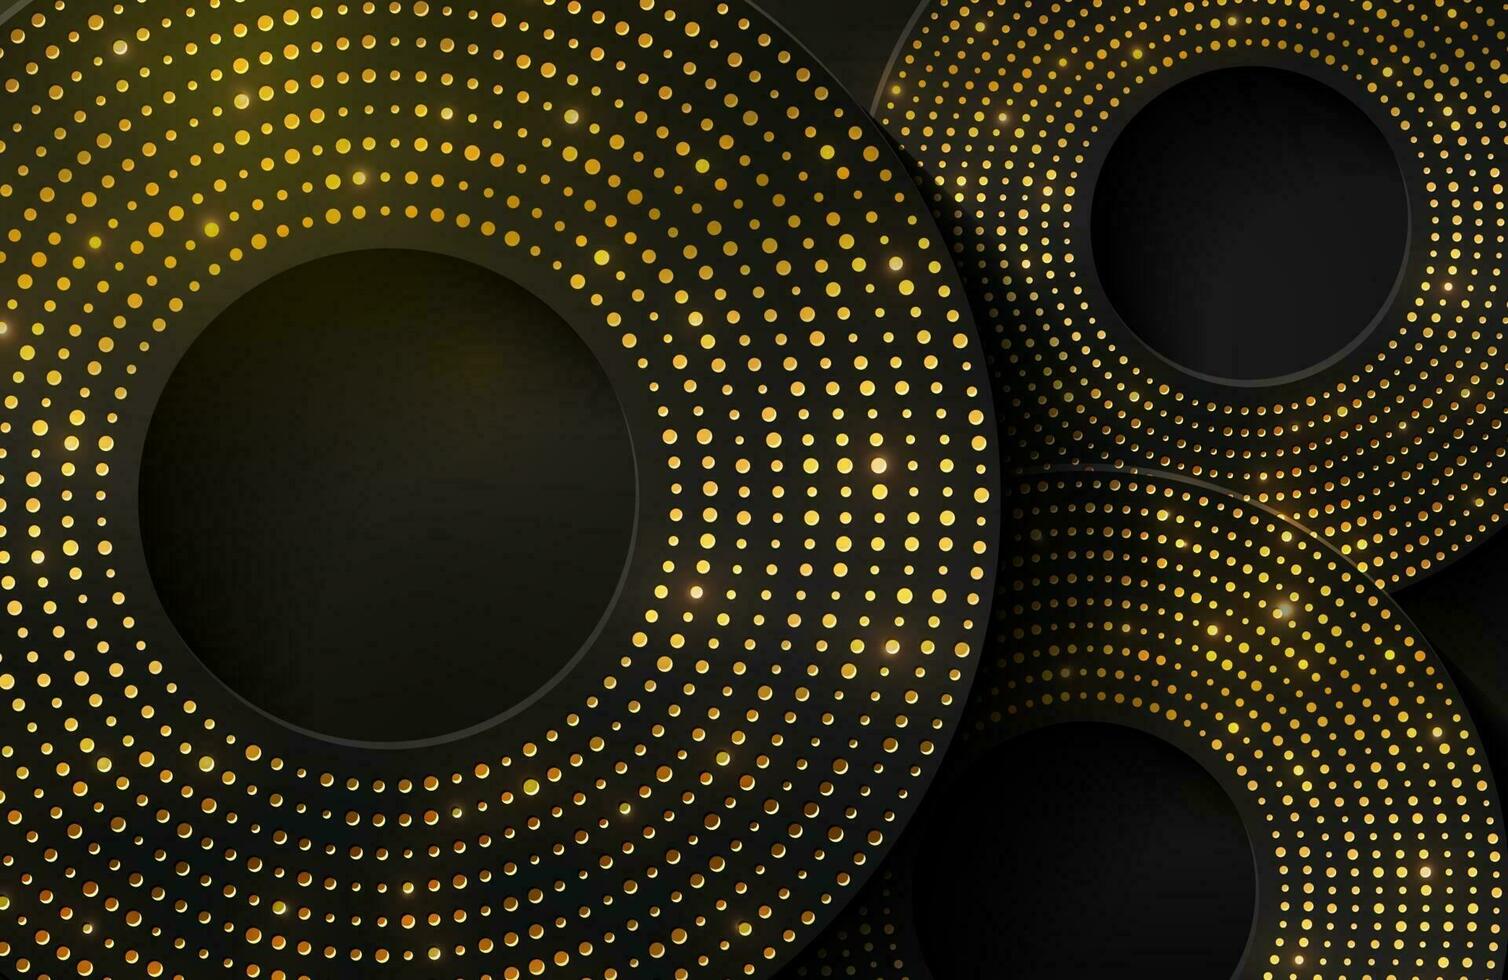 Luxury elegant background with shiny gold circle element and dots particle on dark black metal surface vector